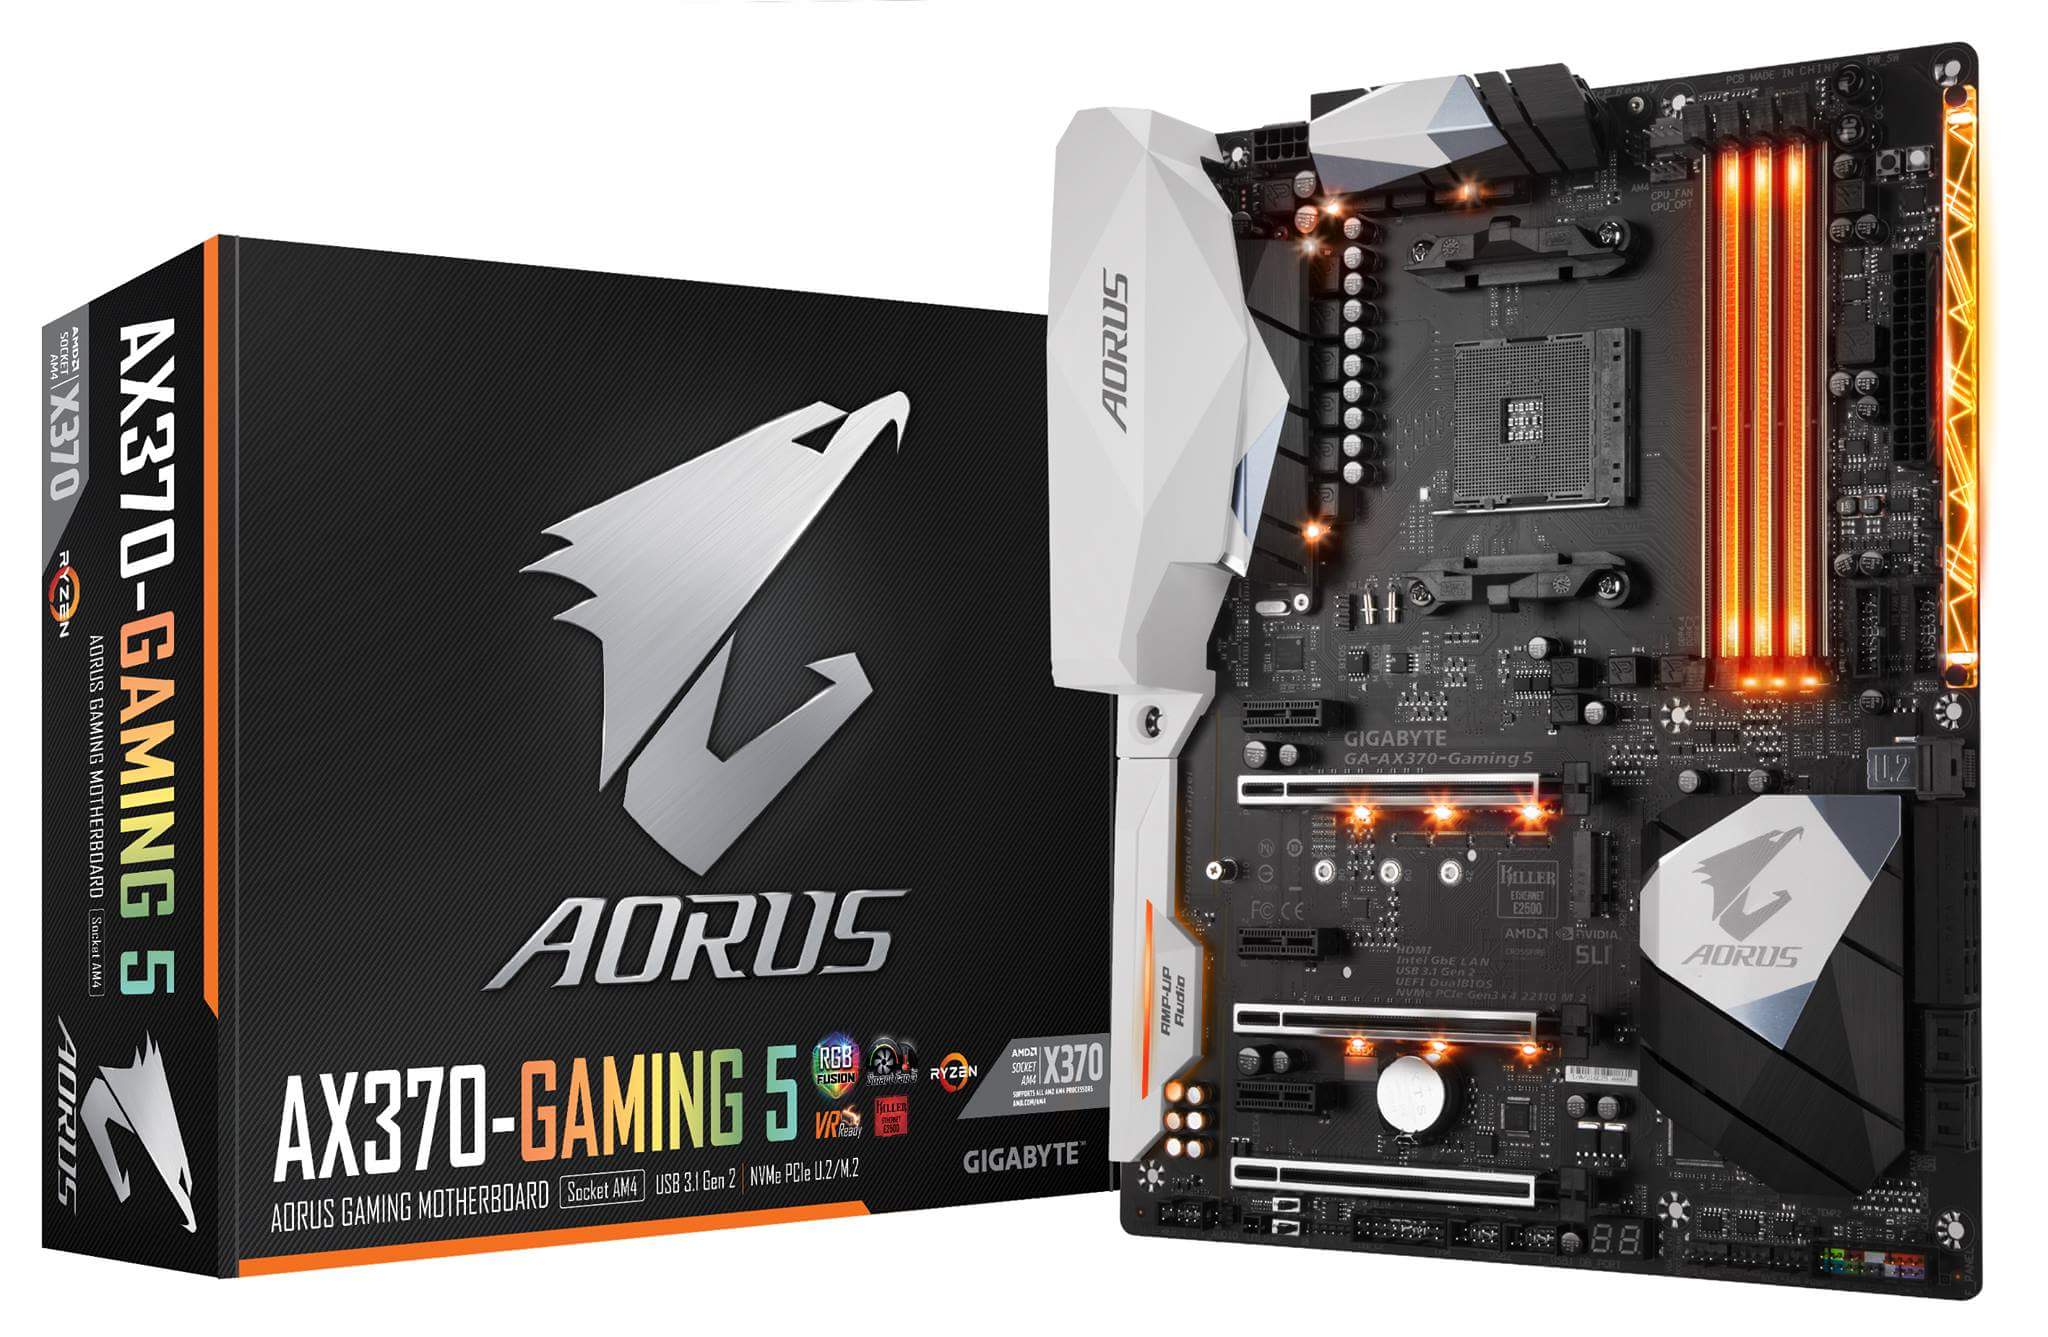 Gigabyte shows off AORUS AM4 motherboard for Ryzen CPUs